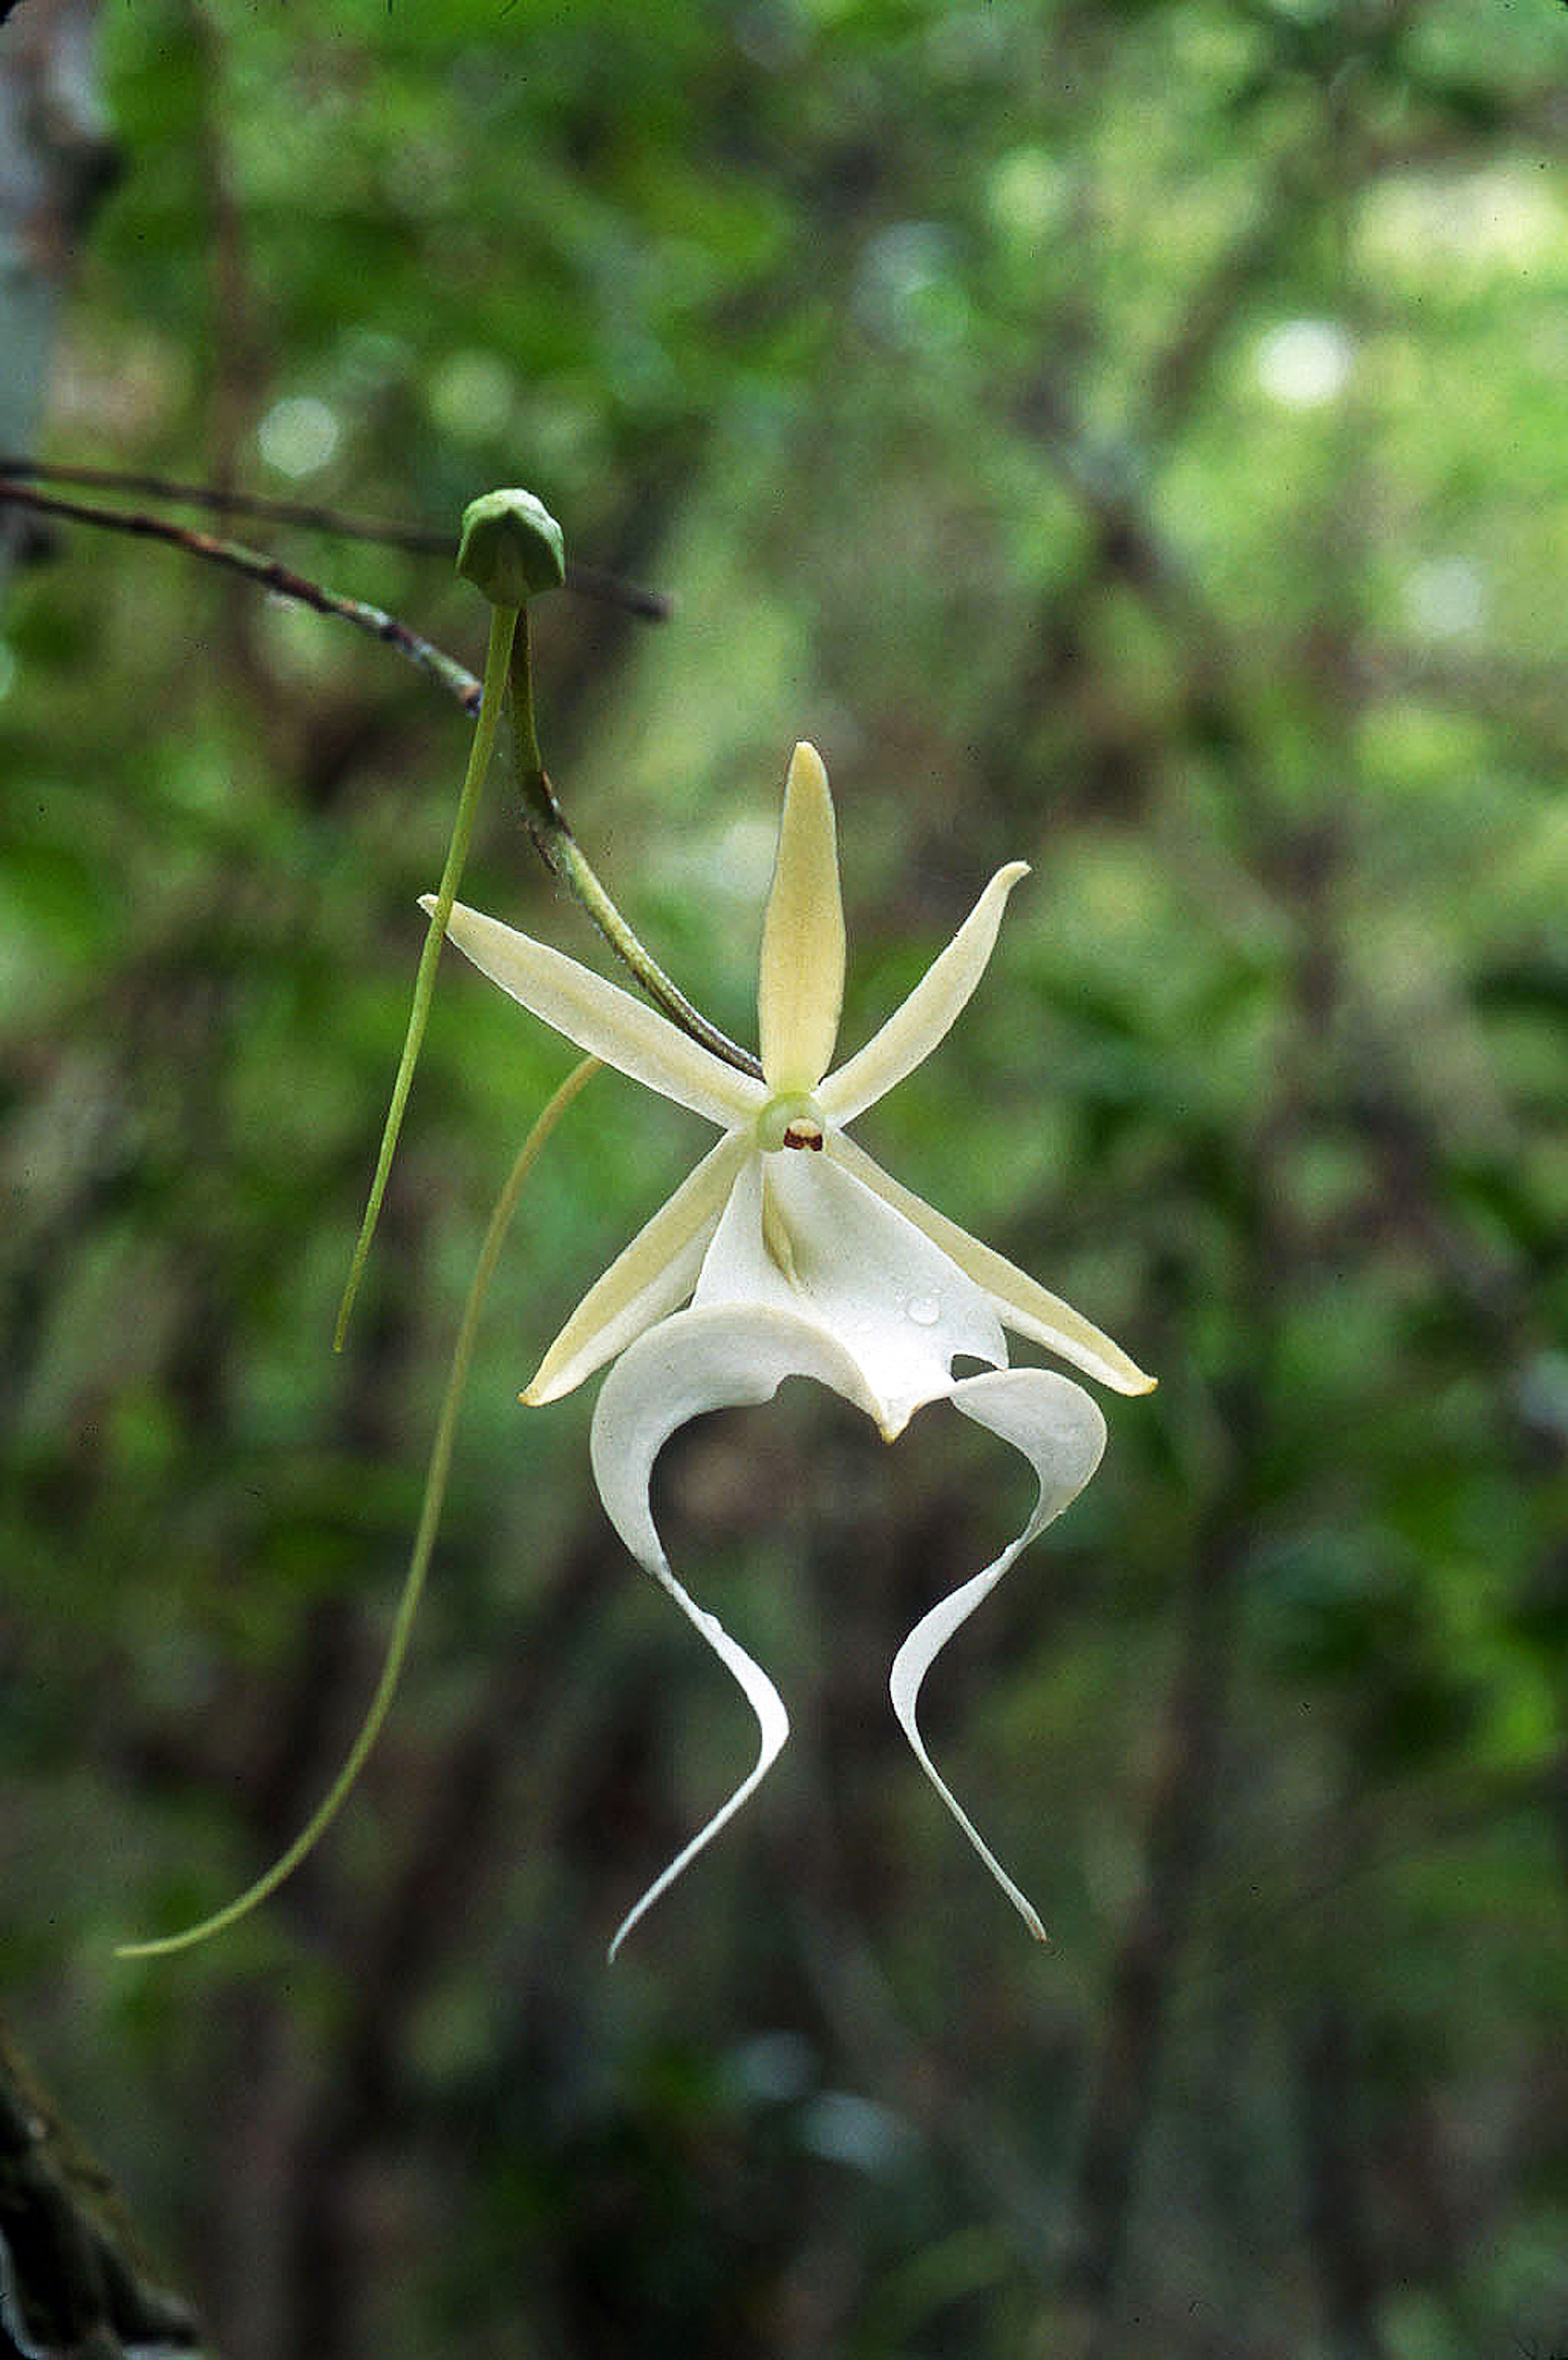 Roger Hammer: “Wild Orchids of Florida” – South Florida Orchid Society